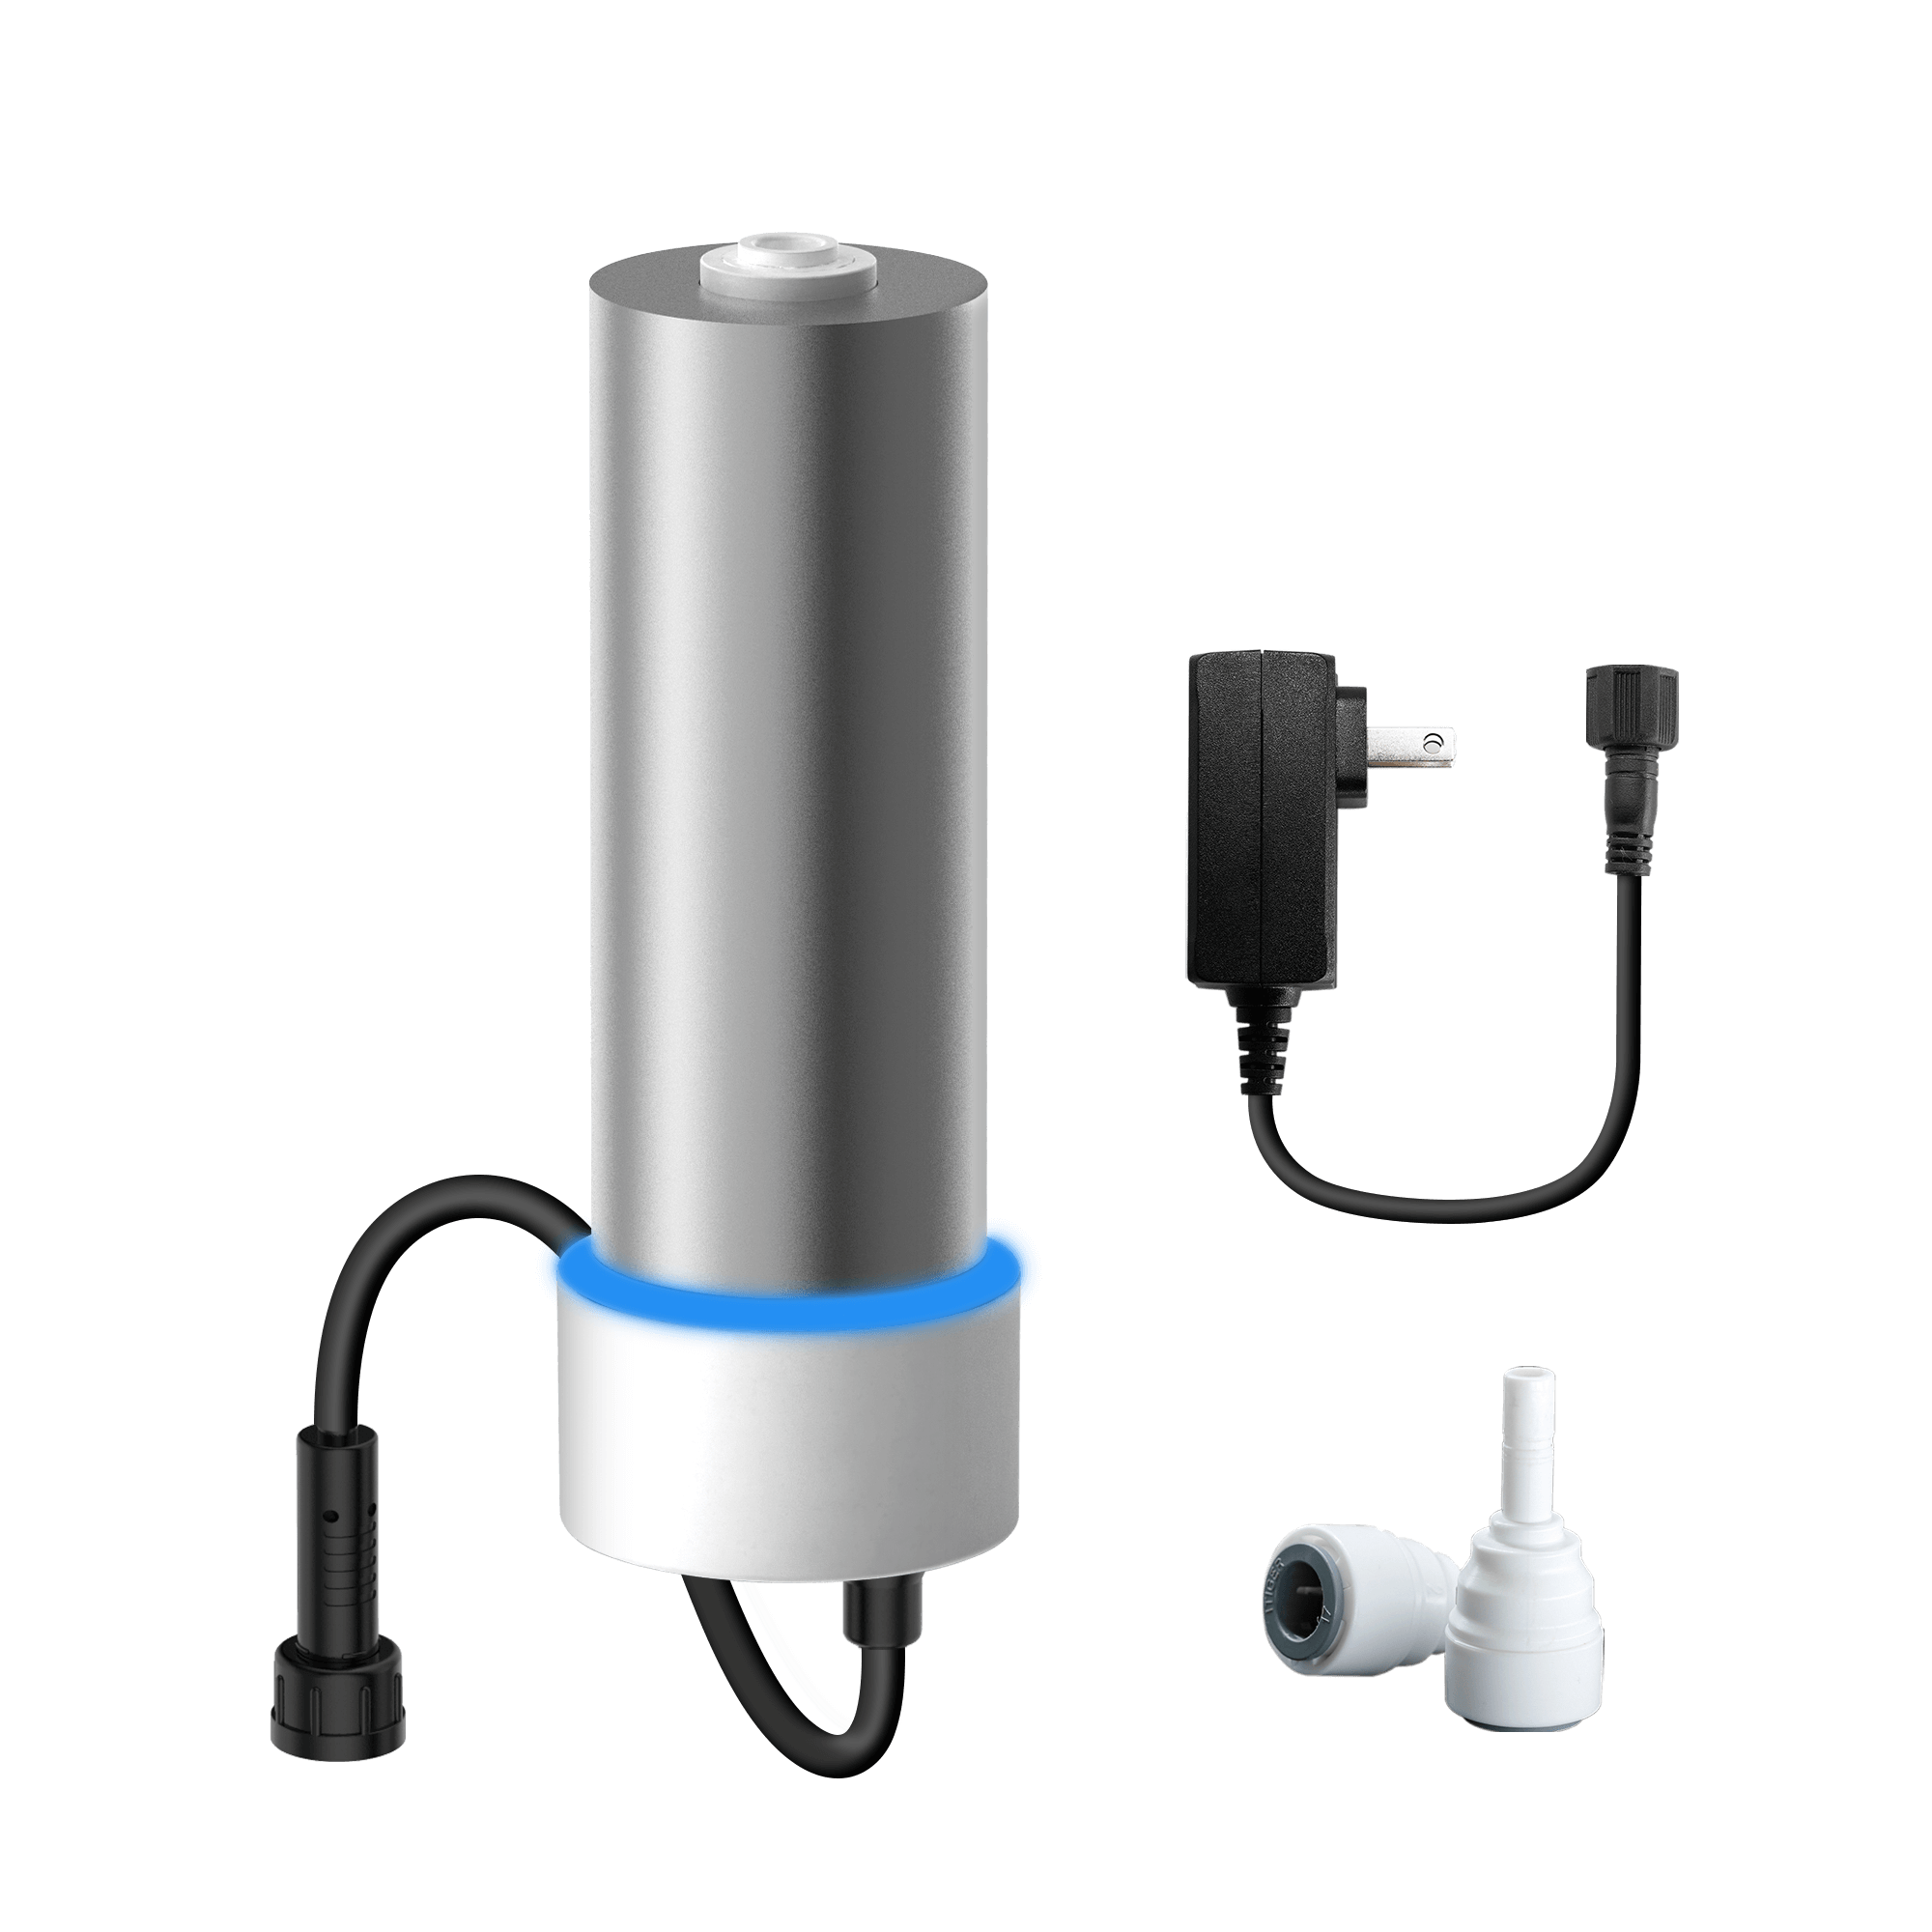 N1MRO filter for waterdrop WD-N1 ro water filtration system